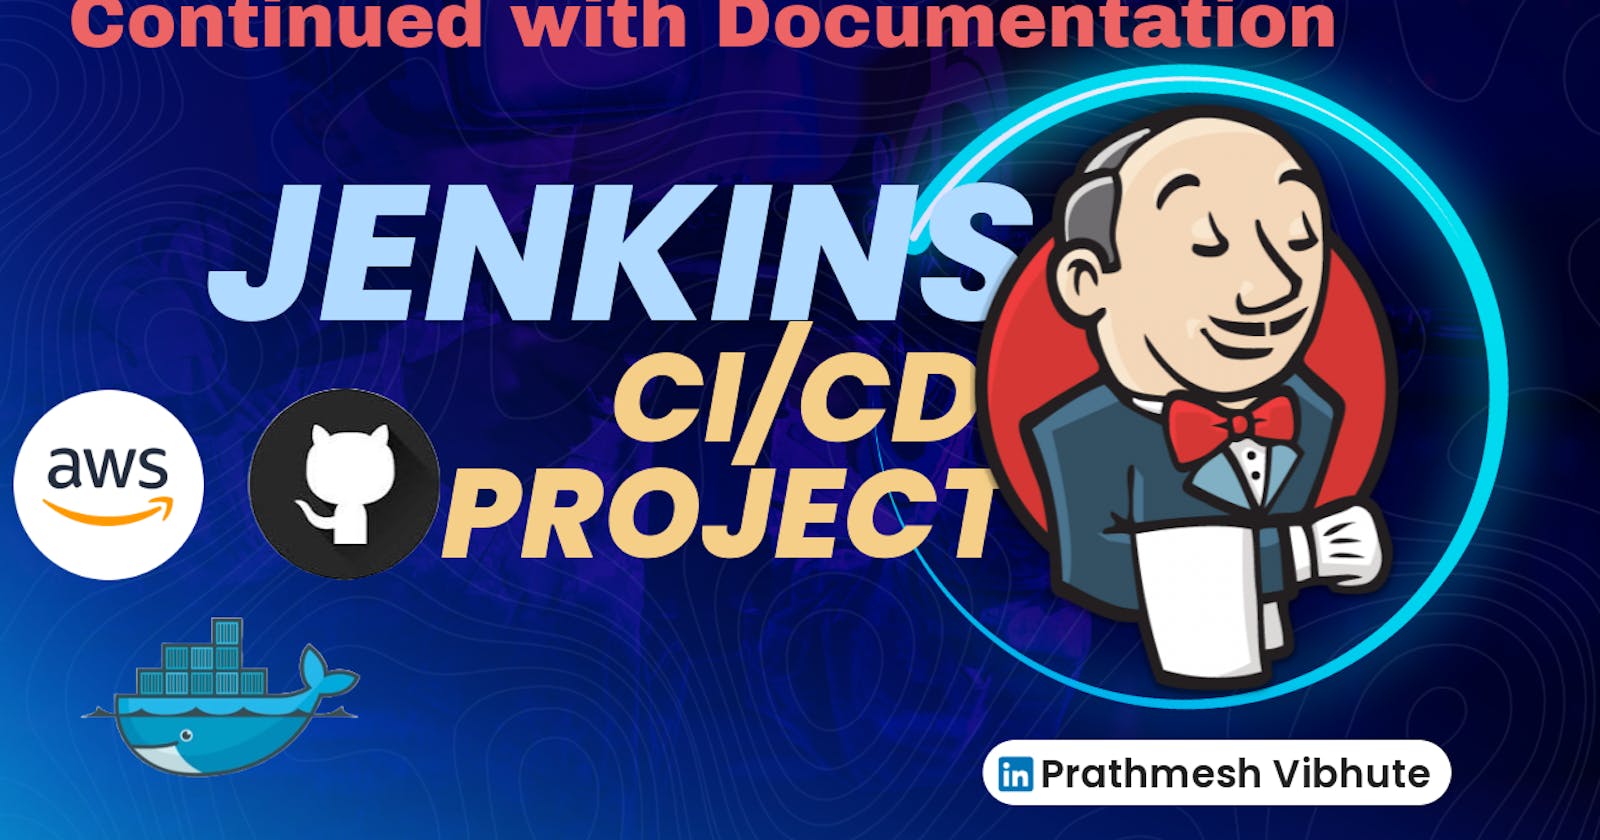 Day 25 : Complete Jenkins CI/CD Project - Continued with Documentation